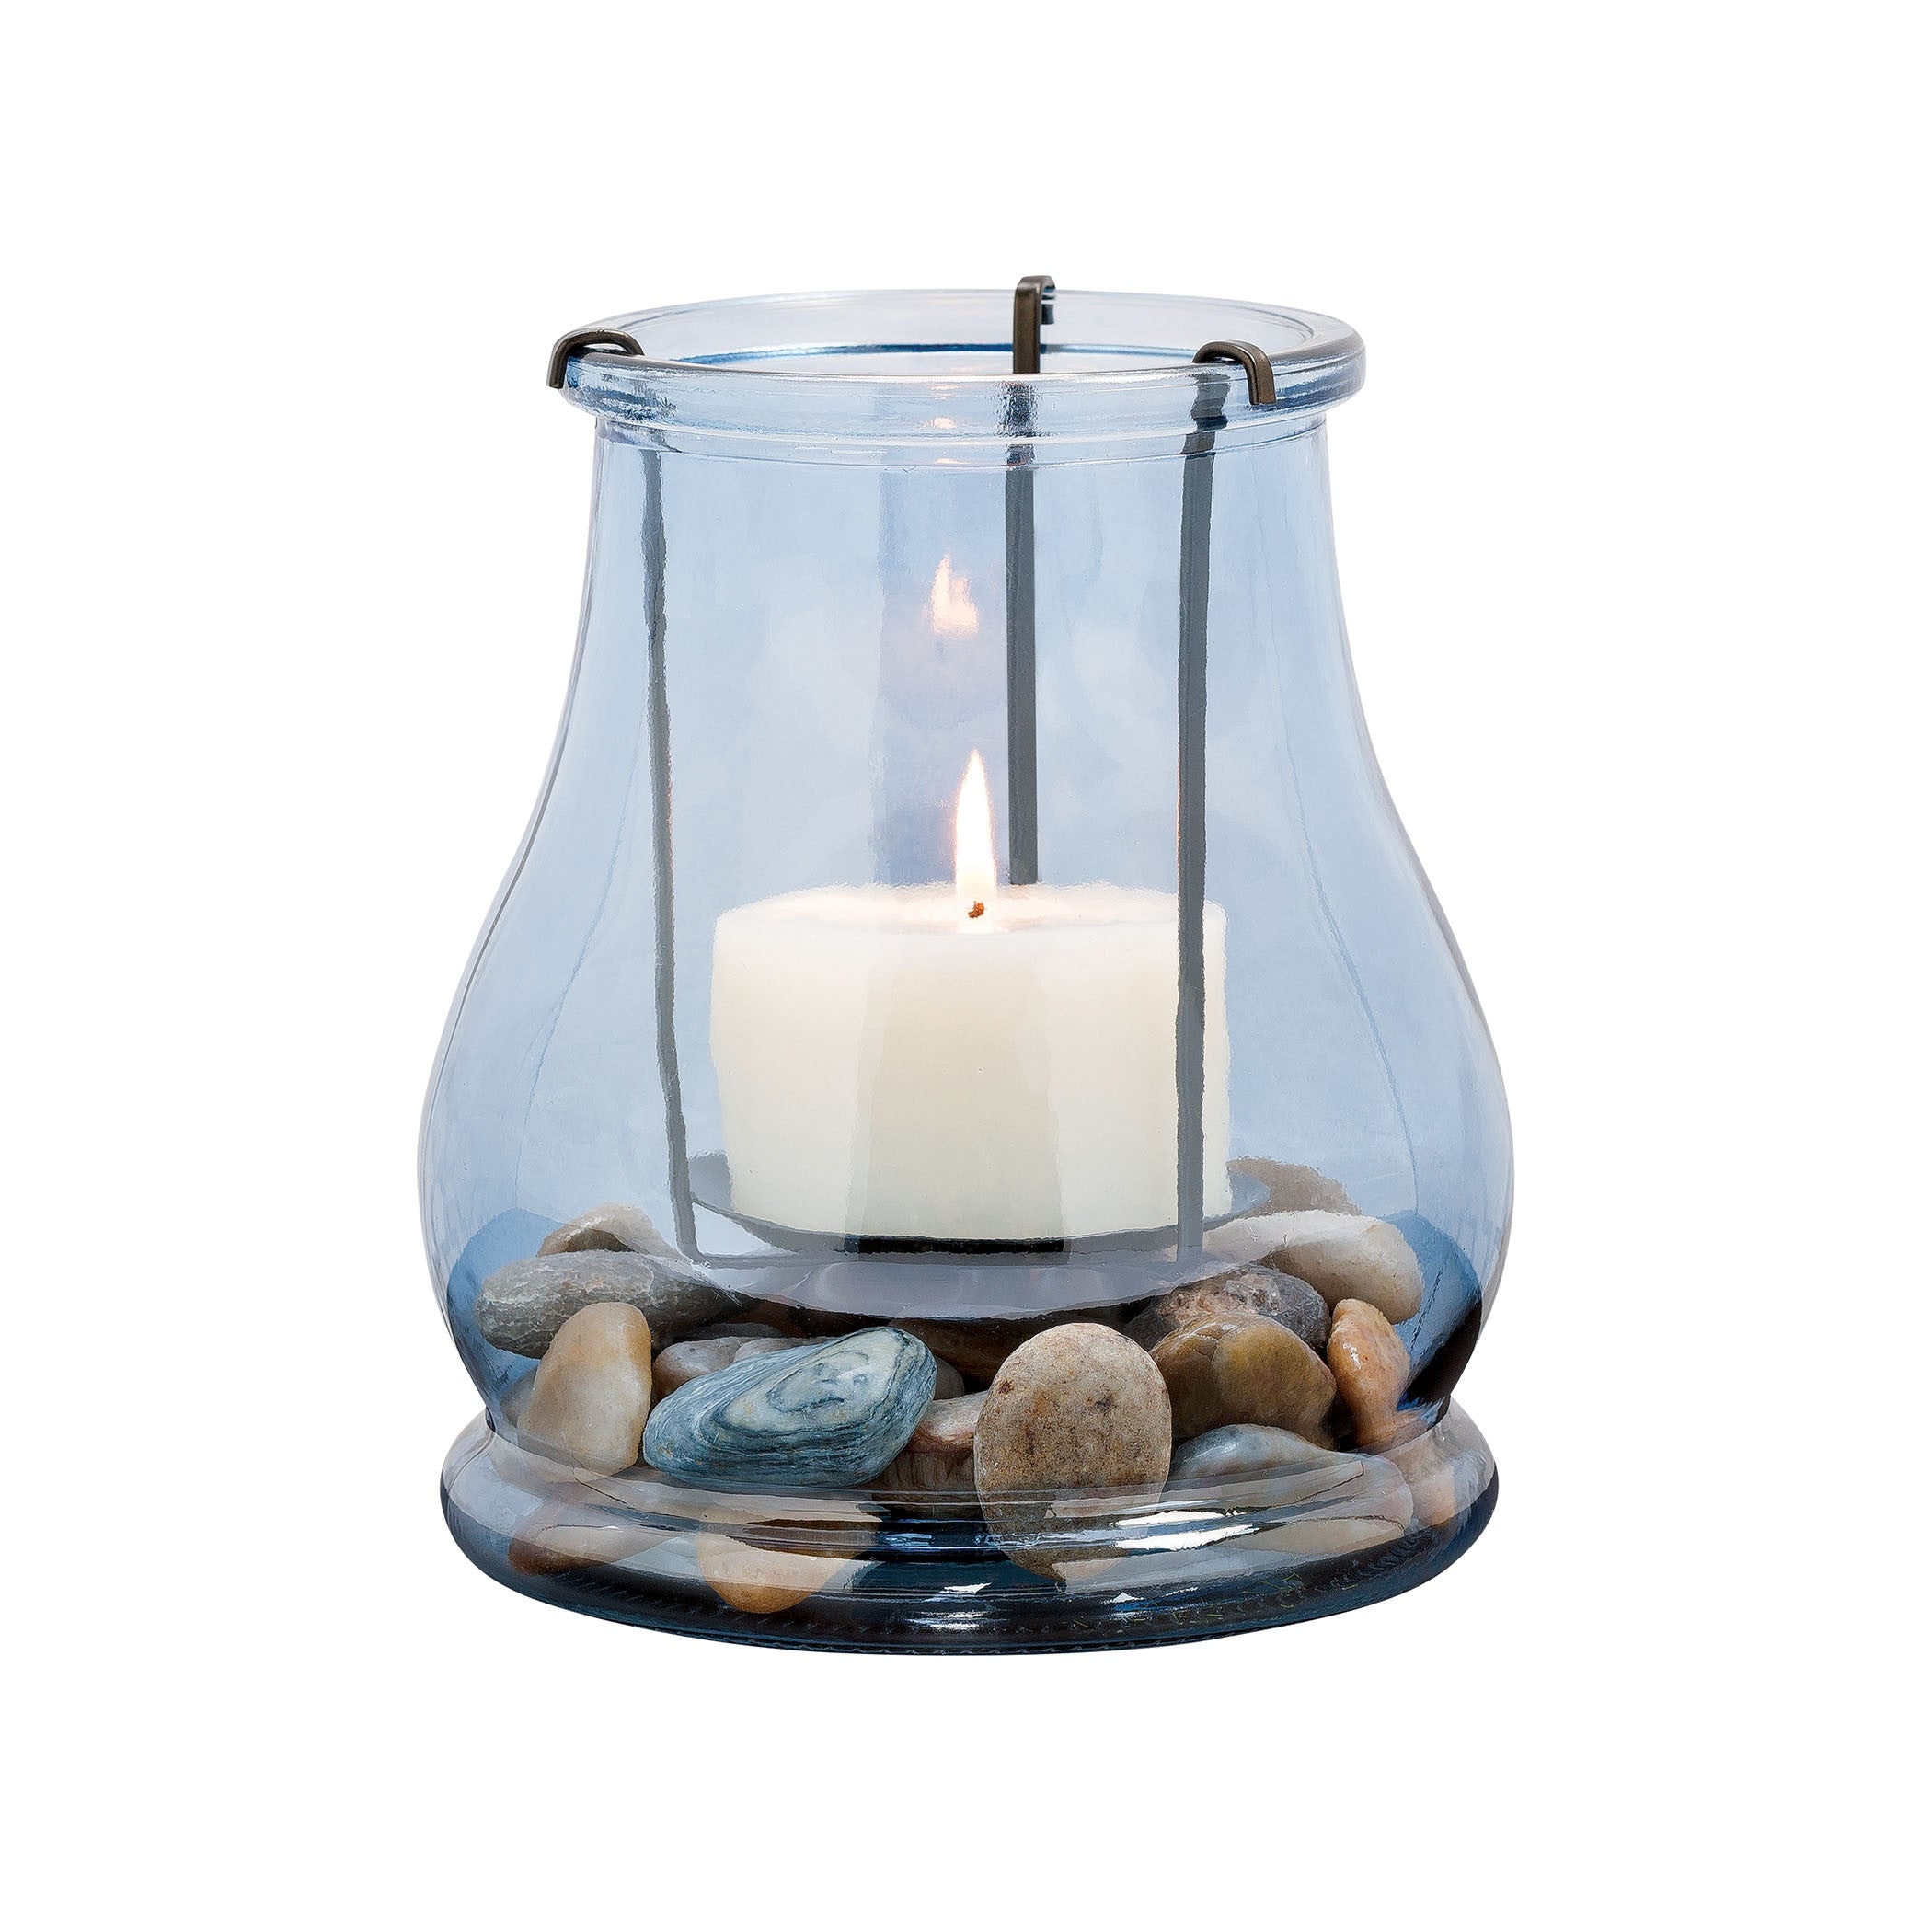 Pomeroy Pom-291012 Caspian Collection Rustic,denim Finish Candle/candle Holder